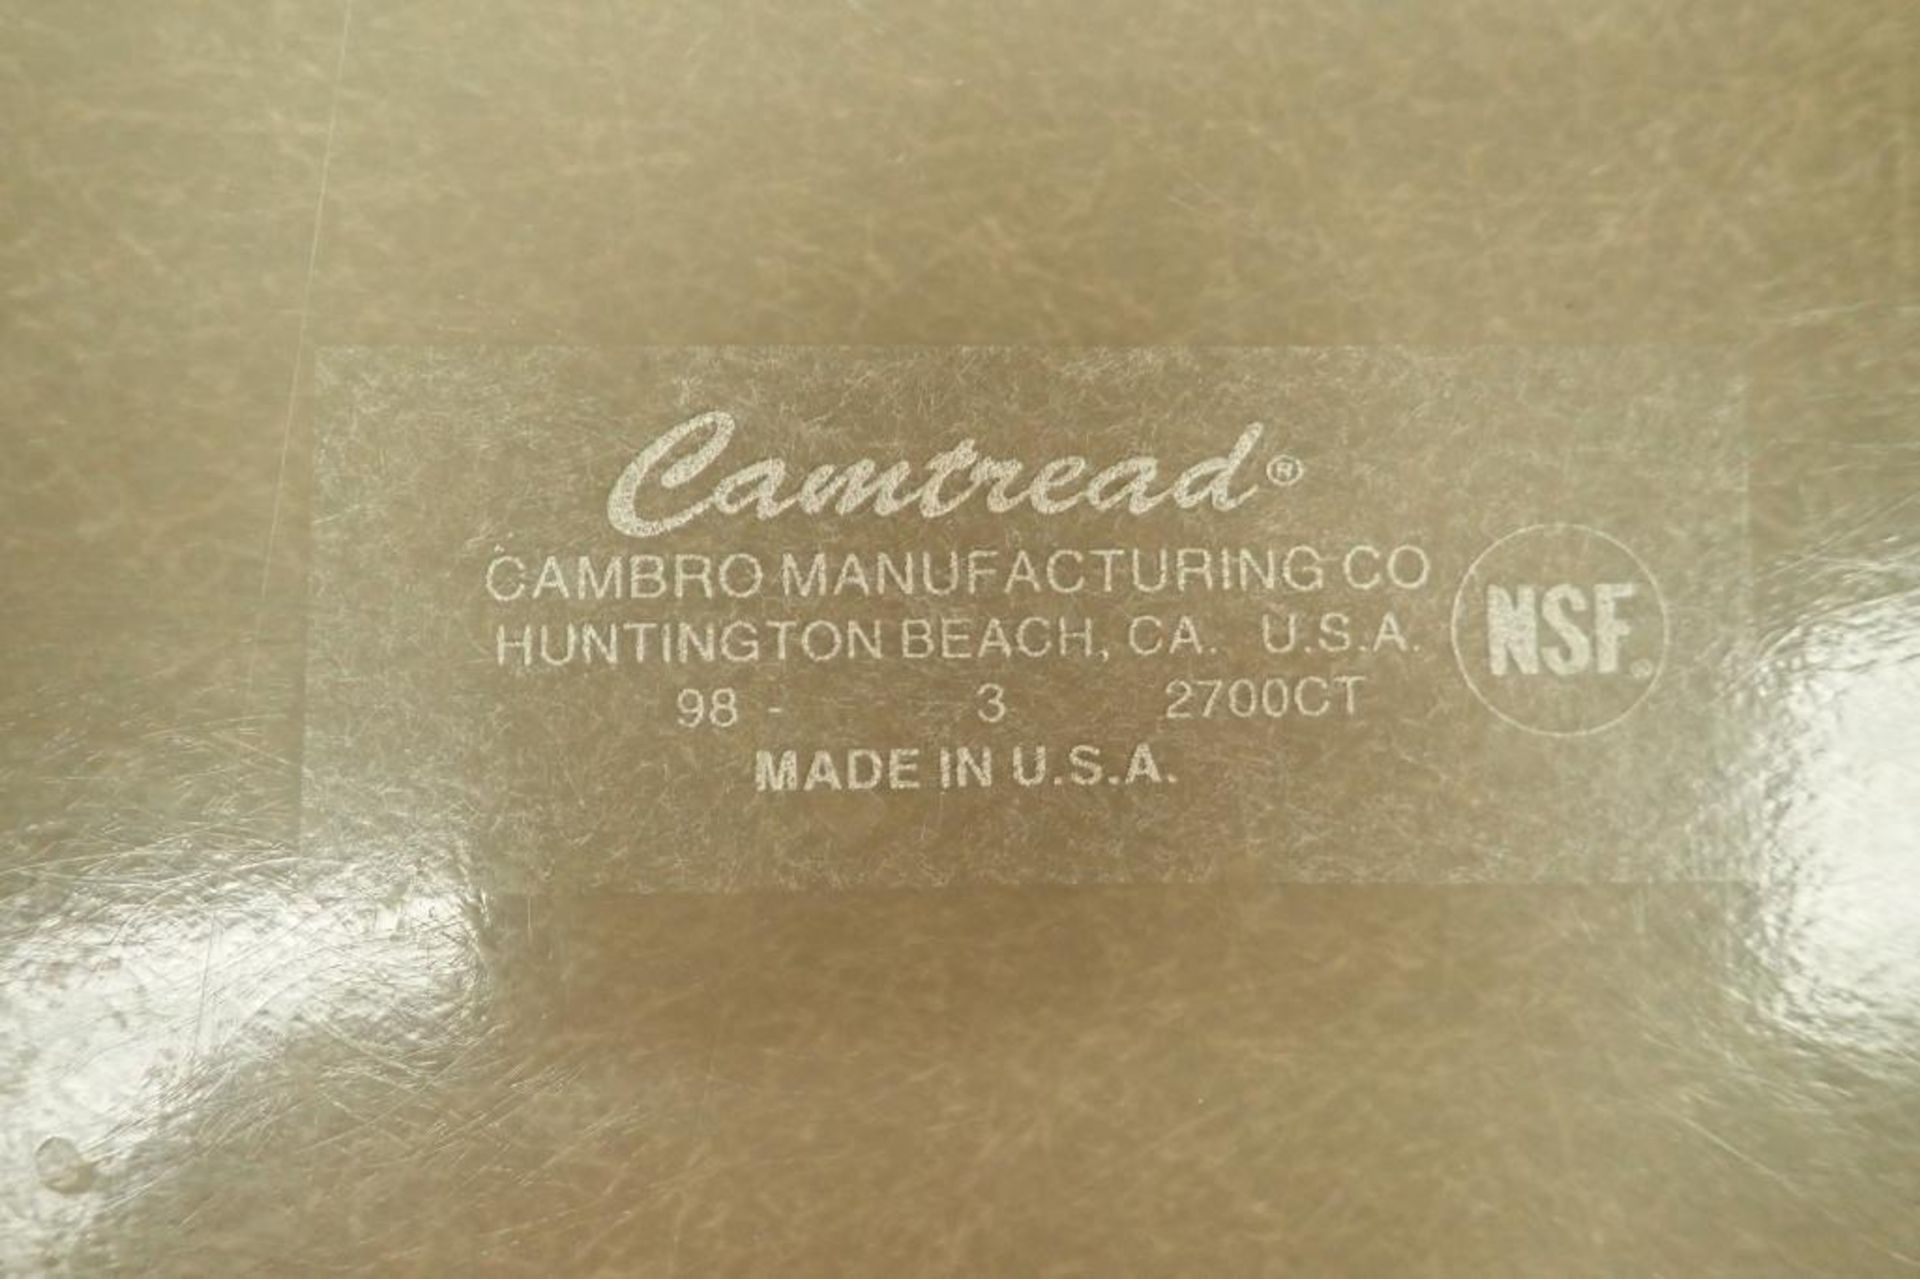 Lot of Cambro camtread plastic trays - Image 3 of 3